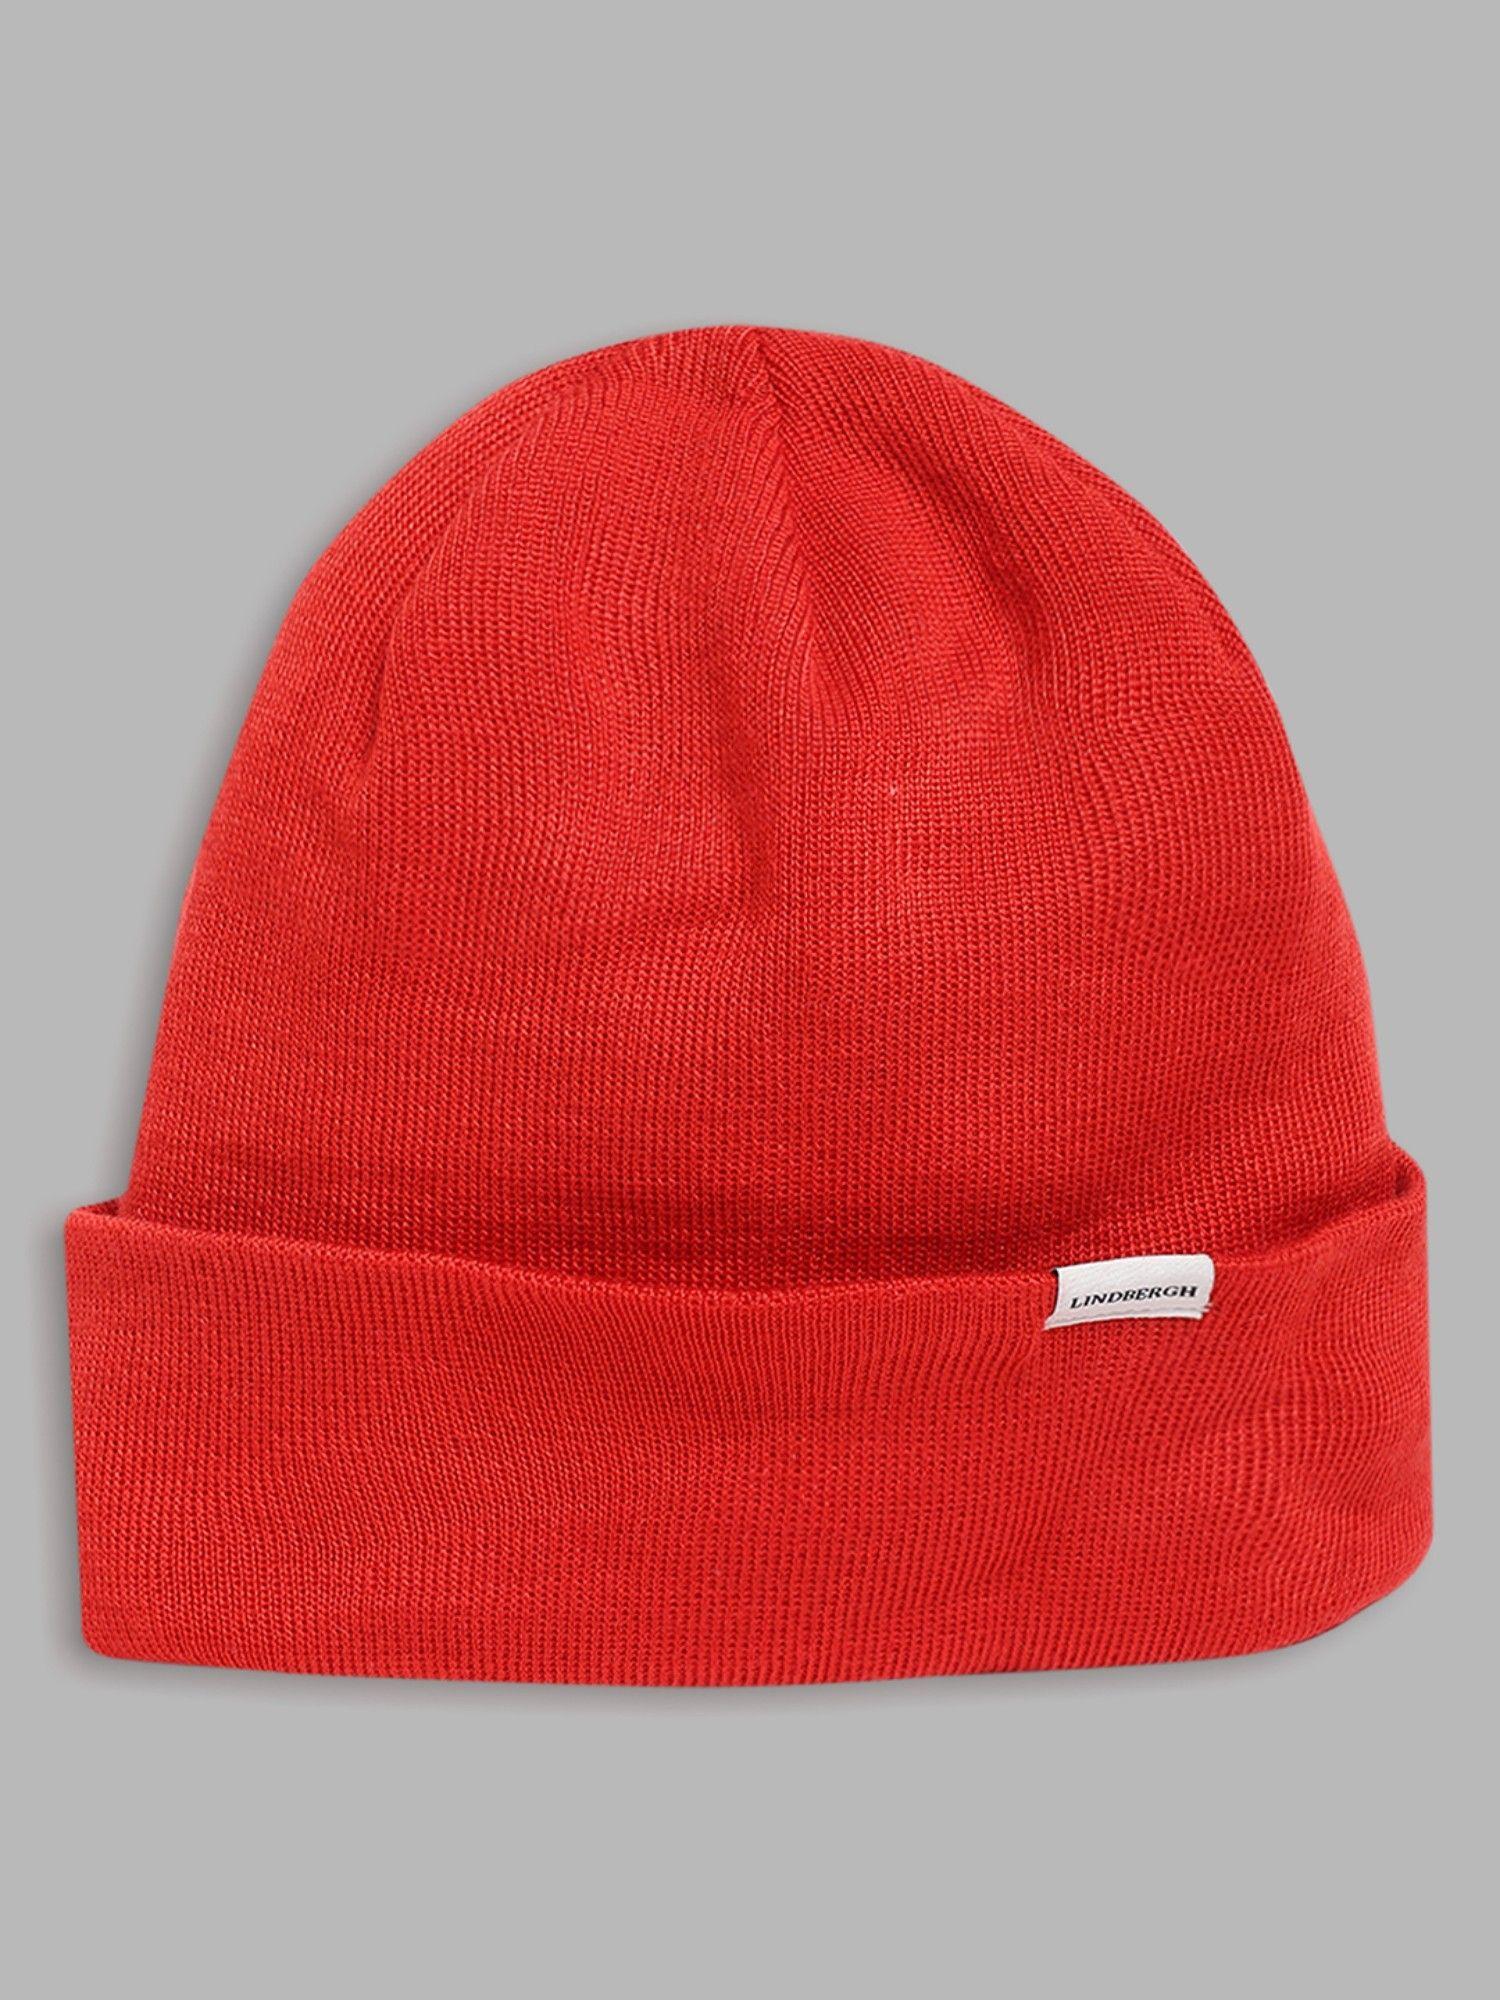 mens-red-woven-beanie